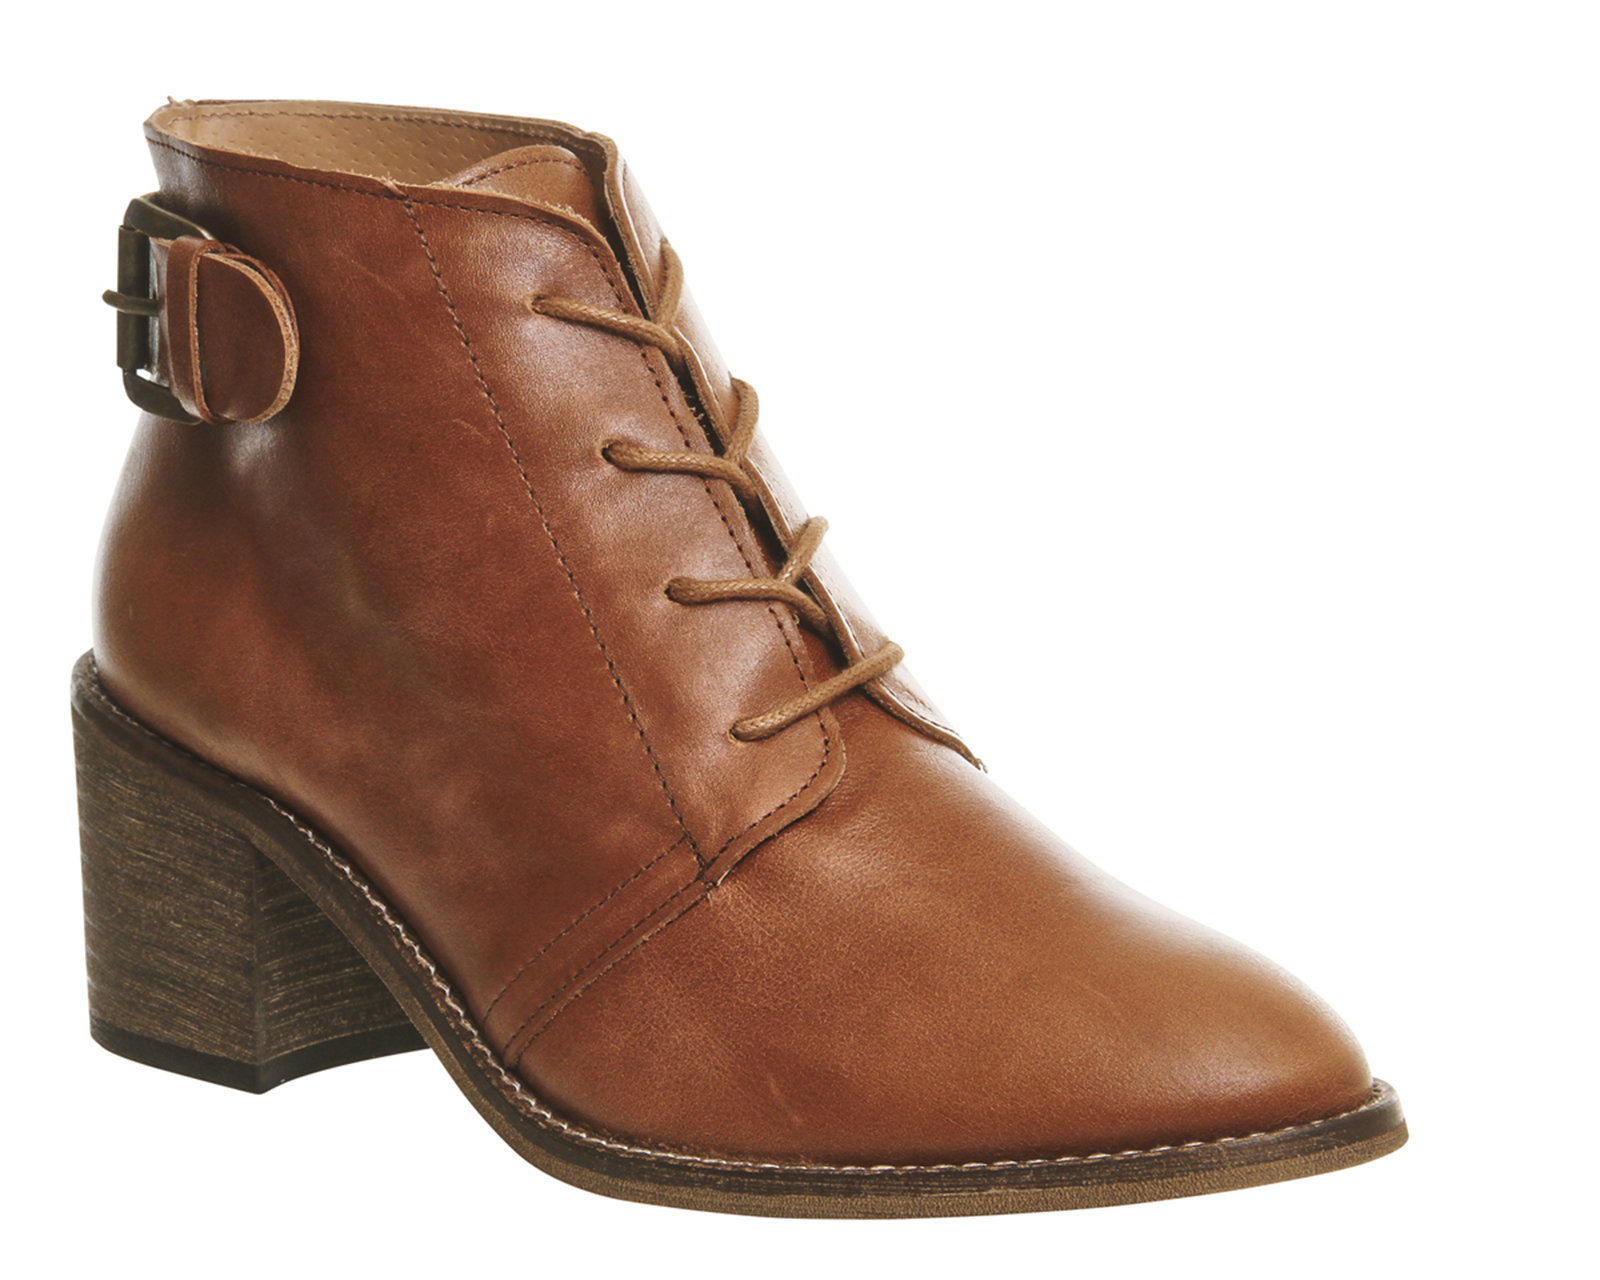 OFFICELacey Lace Up BootsTan Leather